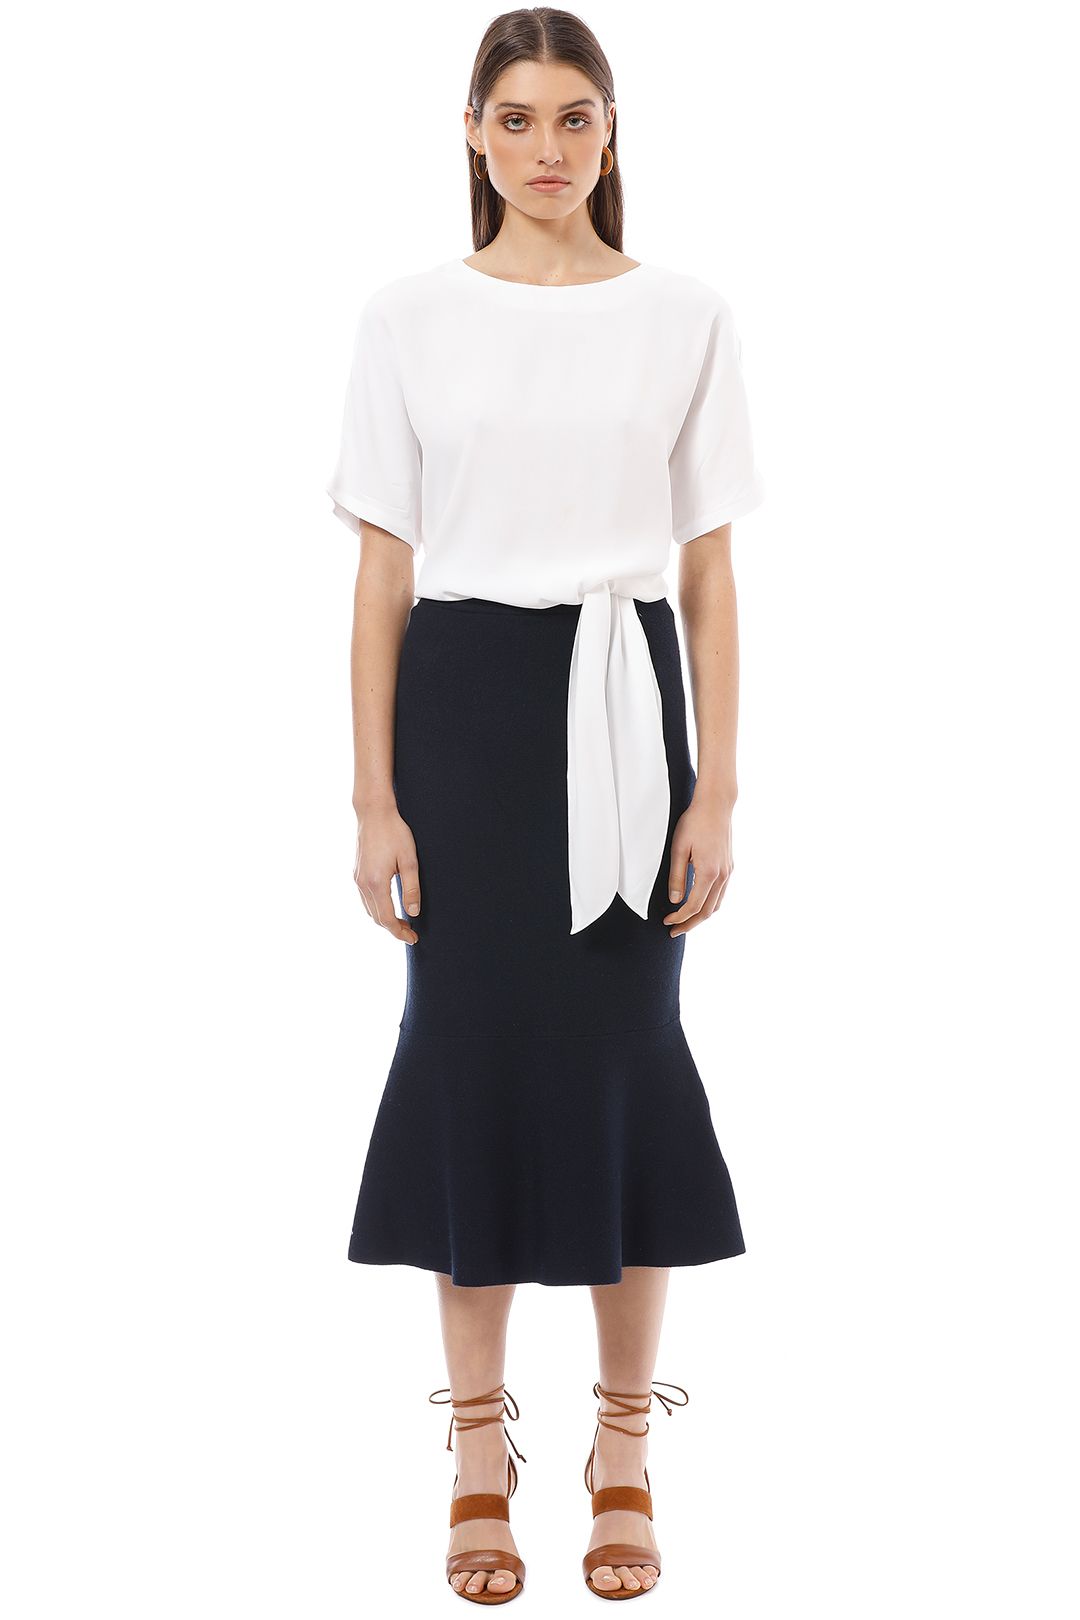 Saba - Carrie Tie Top - White - Front